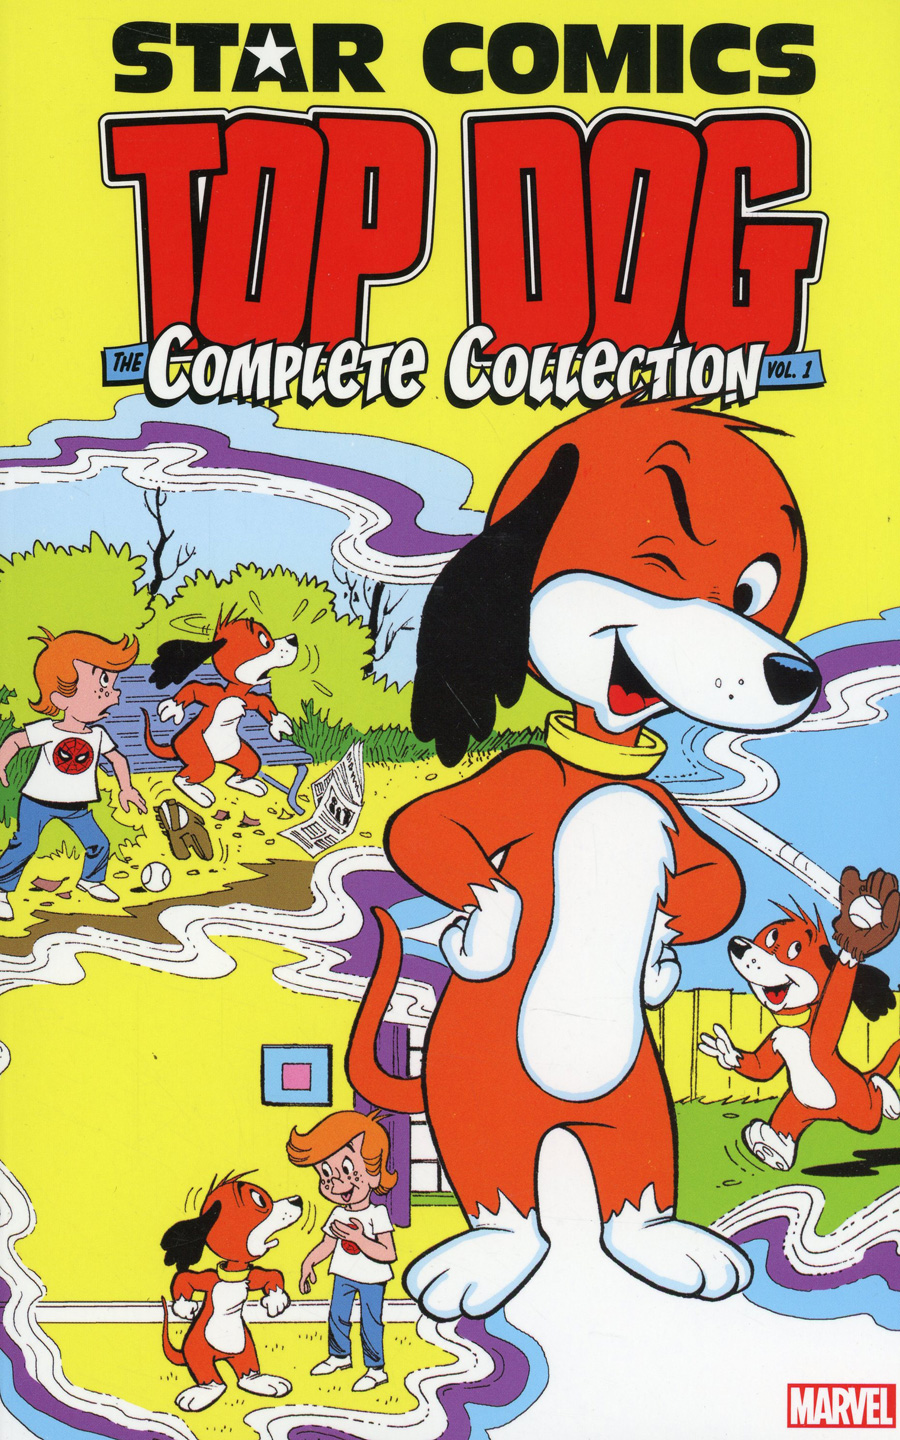 Star Comics Top Dog Complete Collection Vol 1 TP